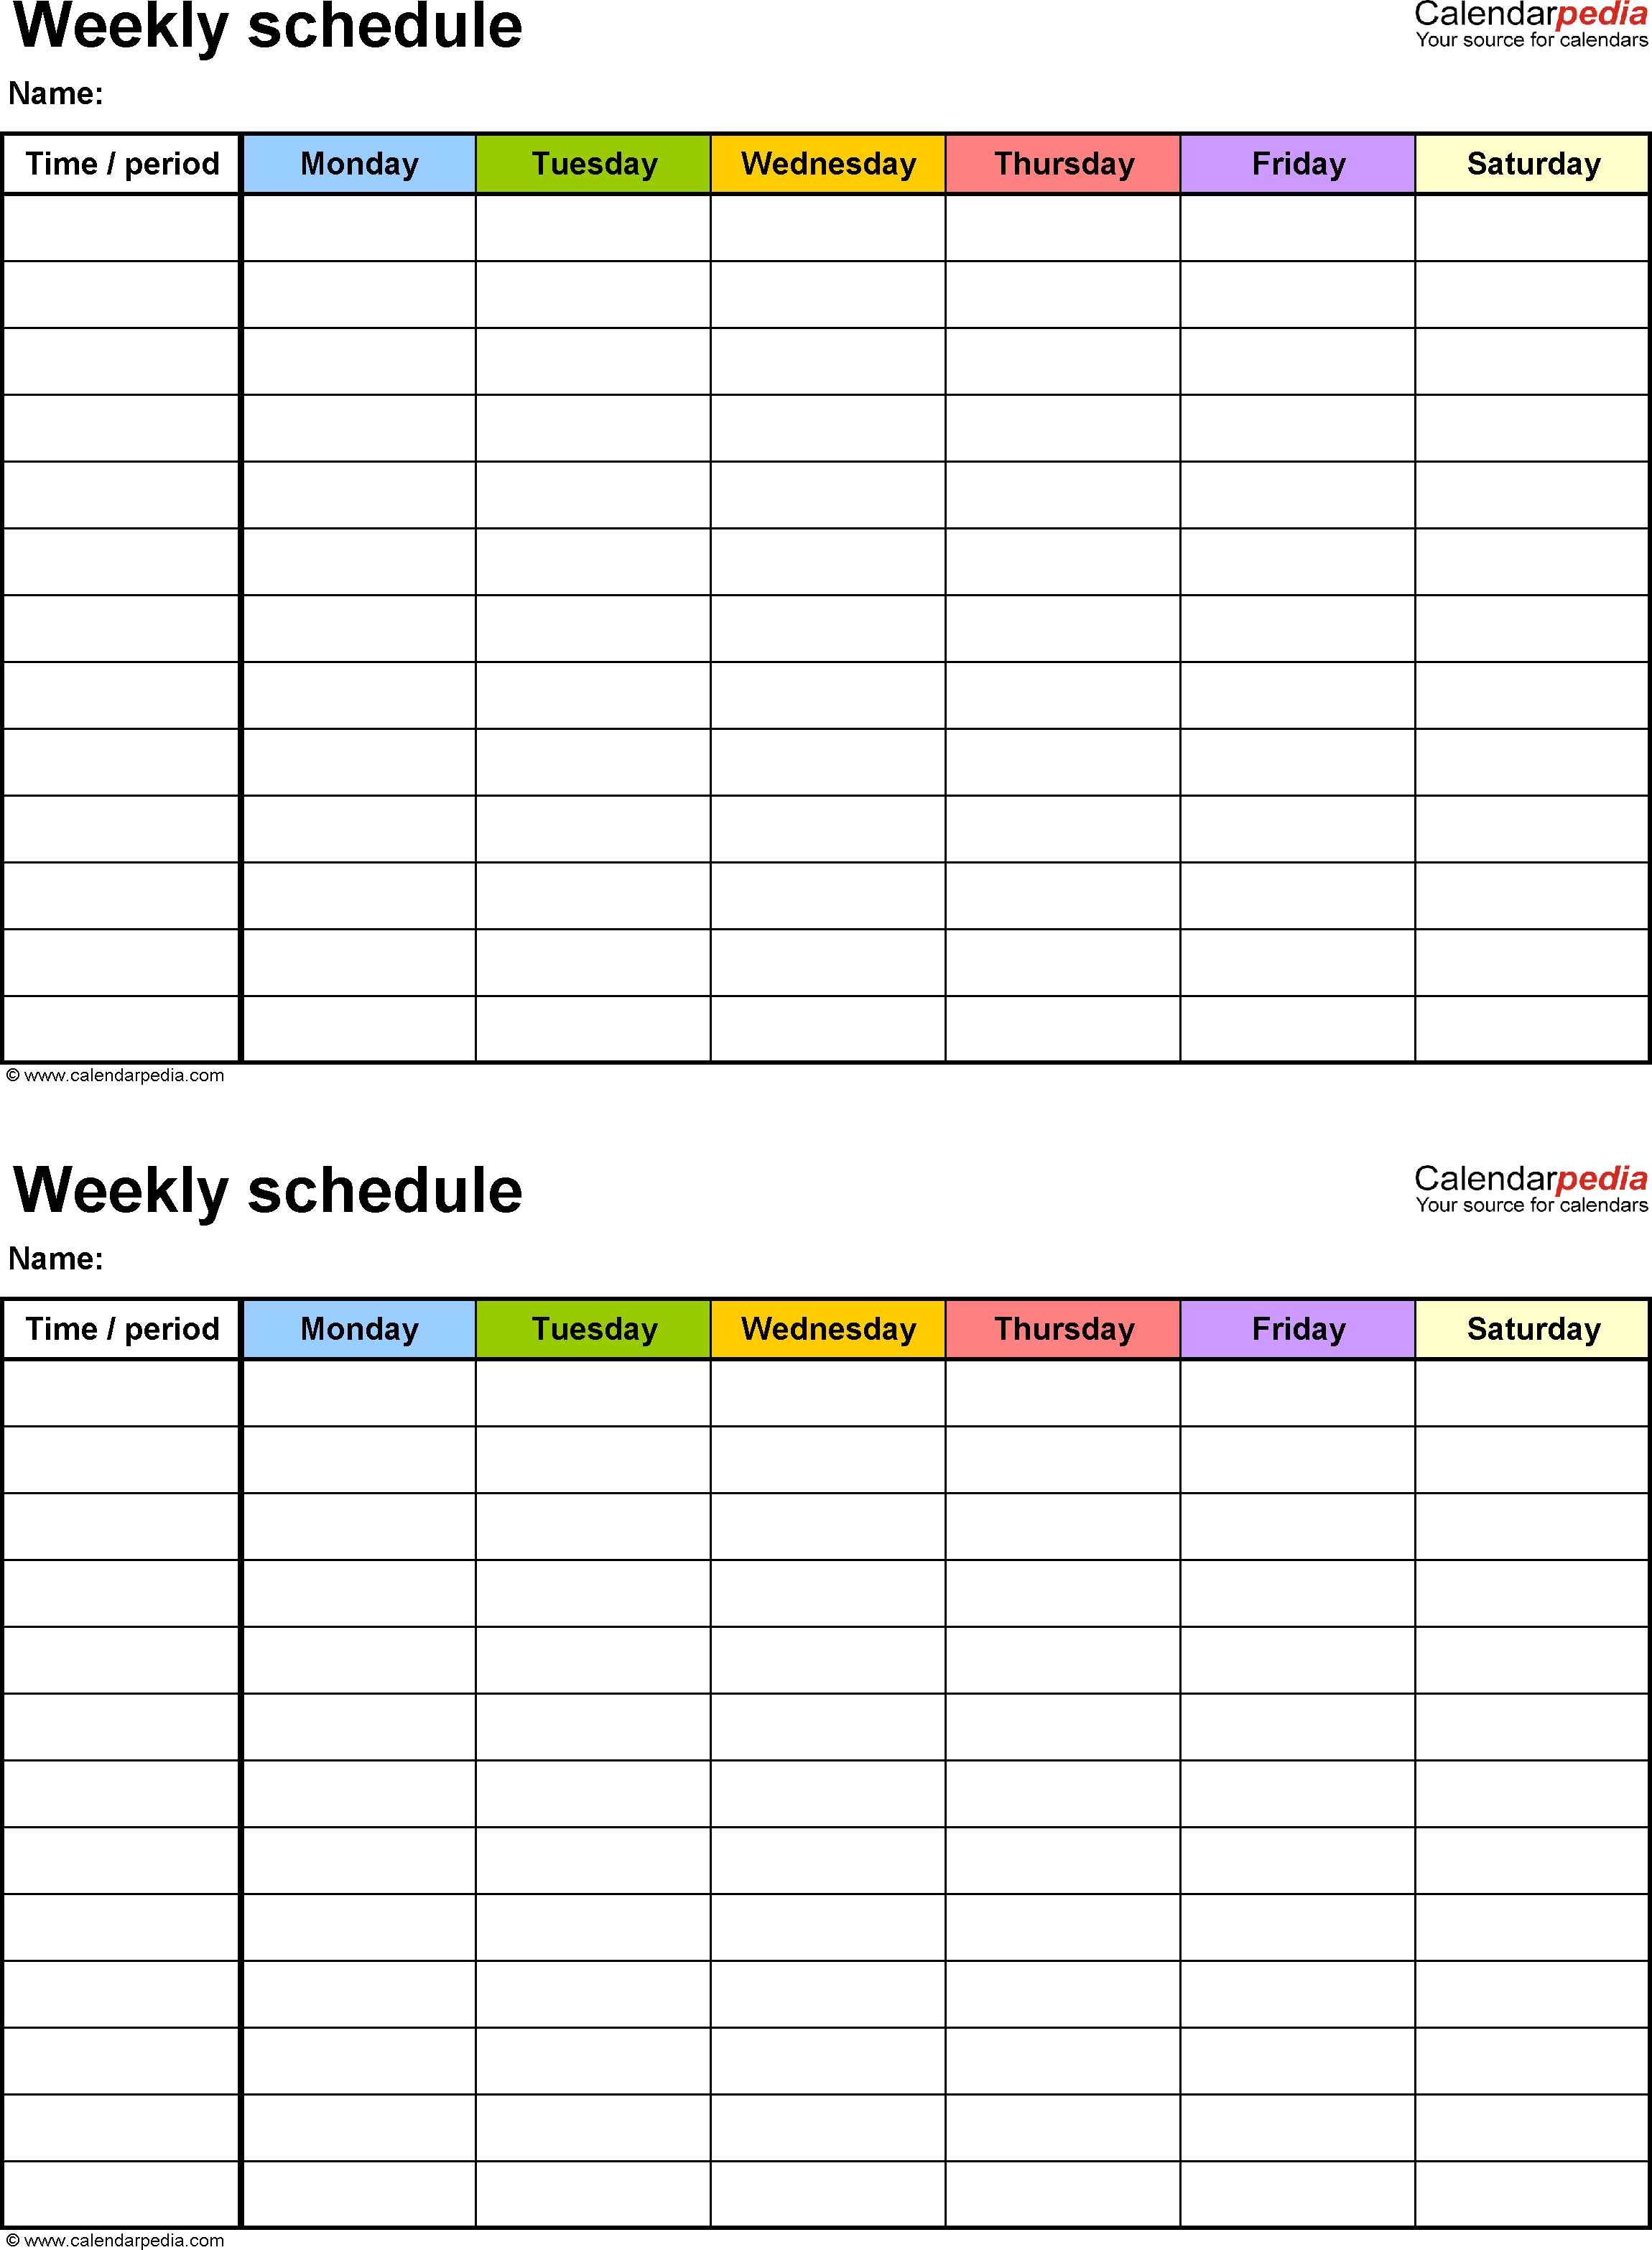 Free Weekly Schedule Templates For Word - 18 Templates pertaining to 7-Day Week Blank Calendar Template